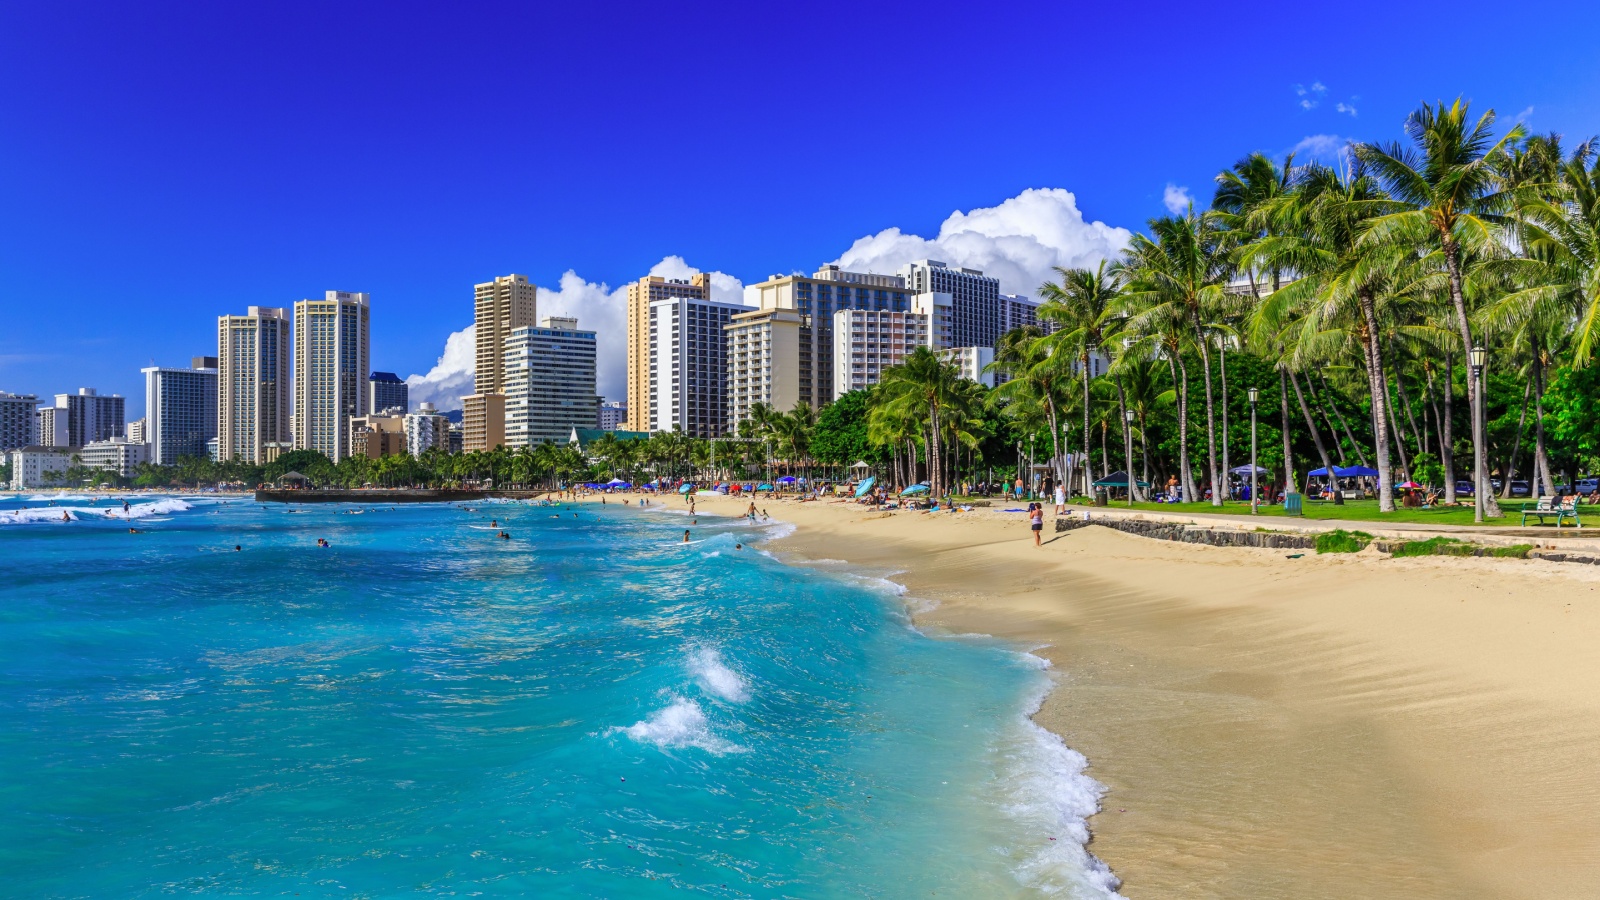 <p><span>Waikiki Beach is often portrayed as the ultimate Hawaiian vacation spot. However, its crowded beaches and high prices may not meet expectations. For a more relaxed Hawaiian experience, you should explore other areas of Oahu, such as the North Shore or Kailua. </span></p>